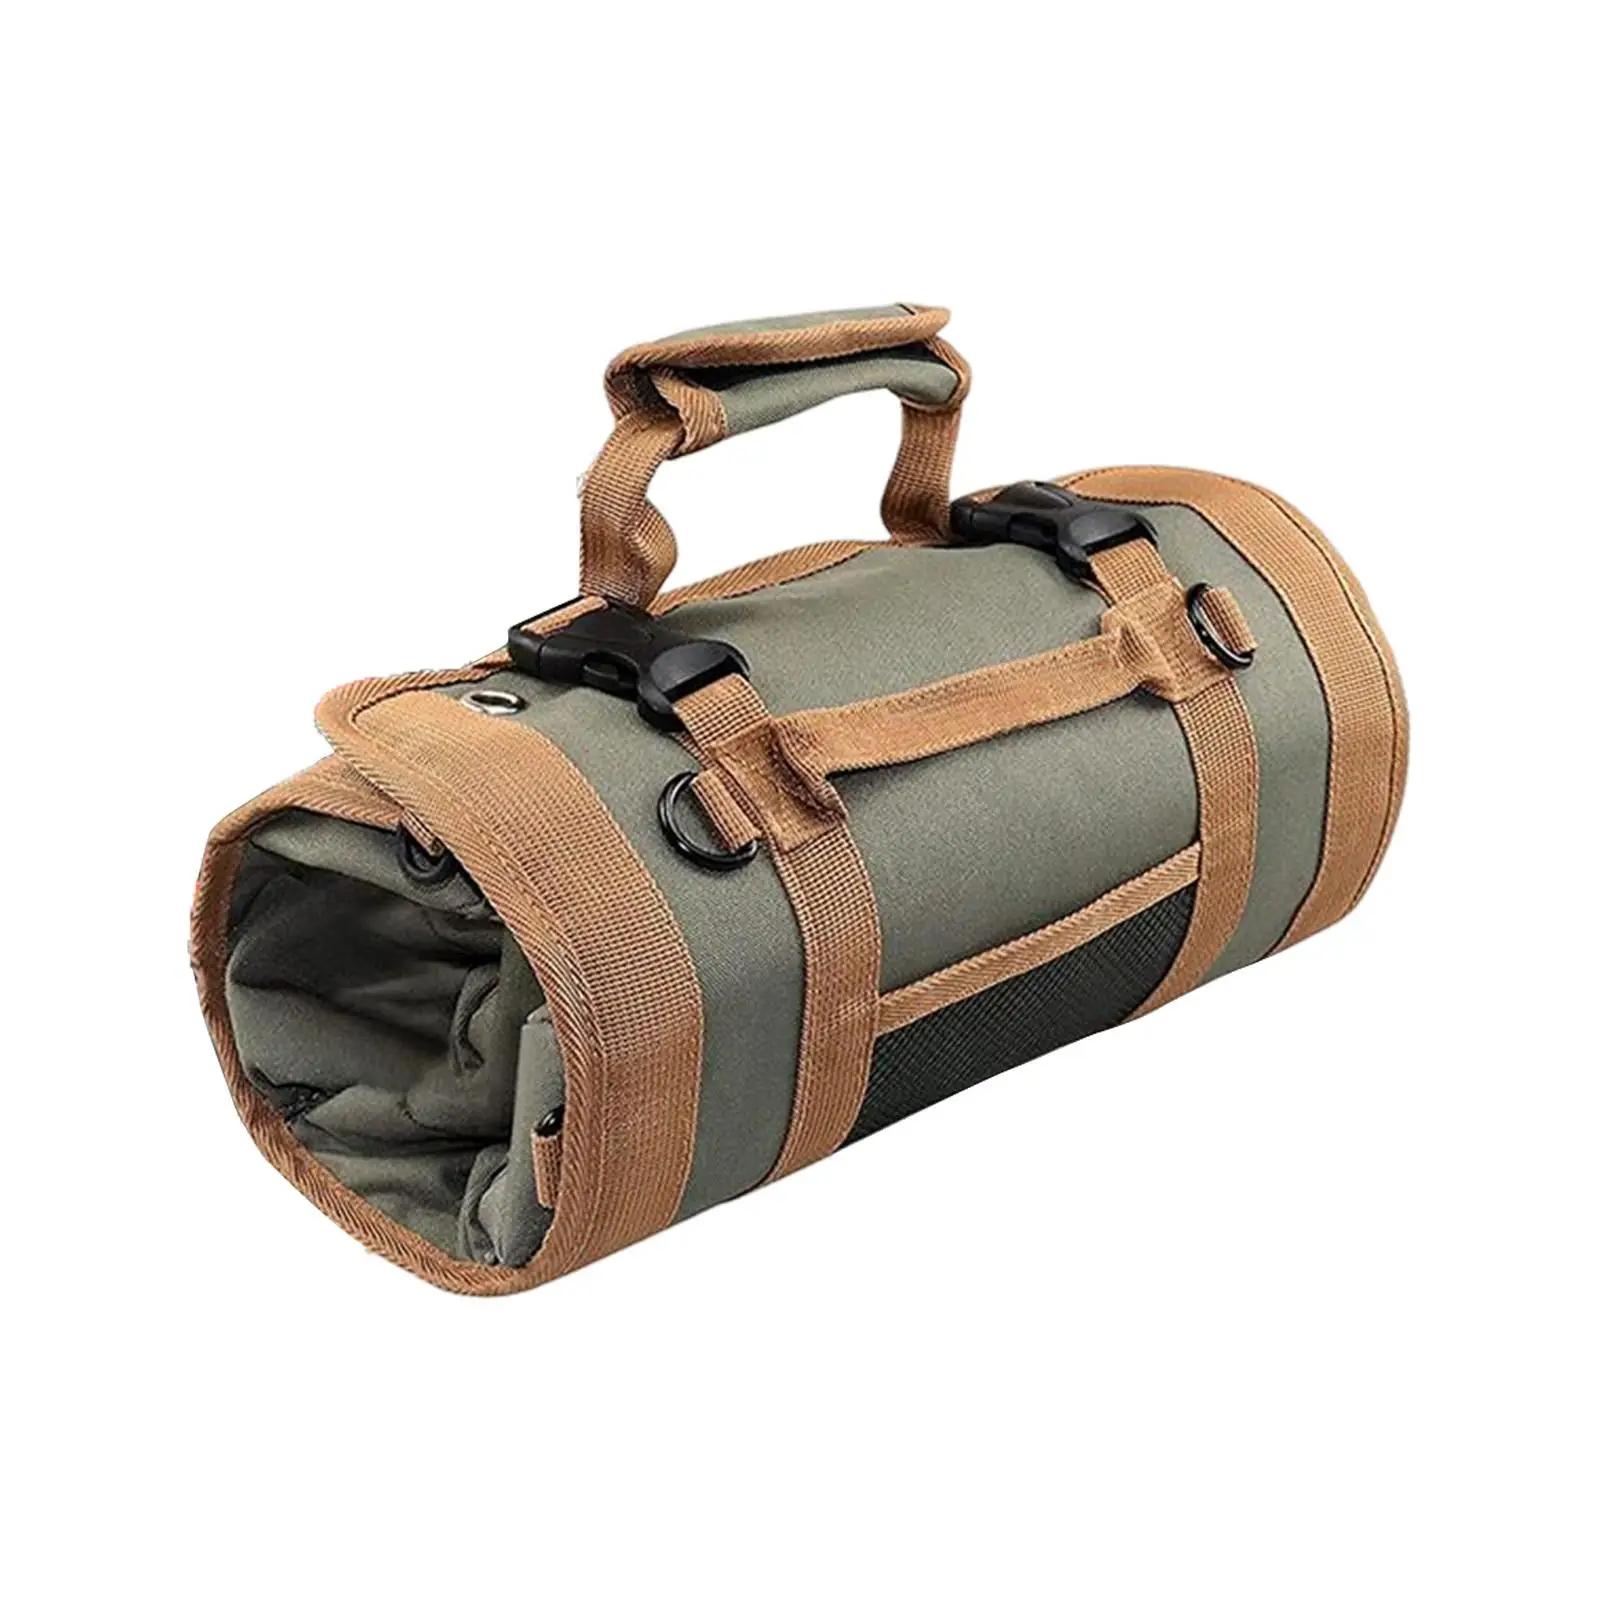 Tool Bag Roll up Small Tool Bag Multipurpose Case with Zipper Organizer Maintenance Tool Bag for Camping Outdoor Hiking Gifts